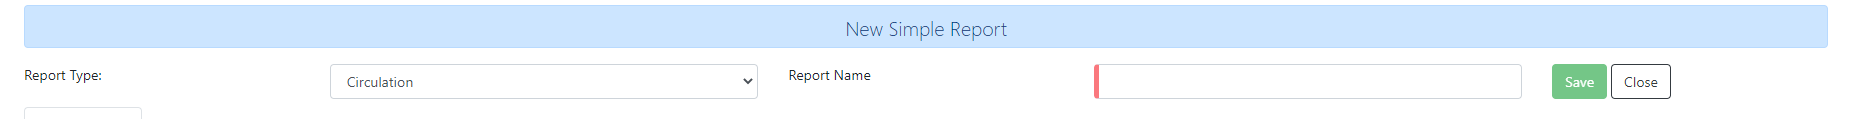 The Report Name field is to the right of the Report Type dropdown menu in the New Simple Report window.